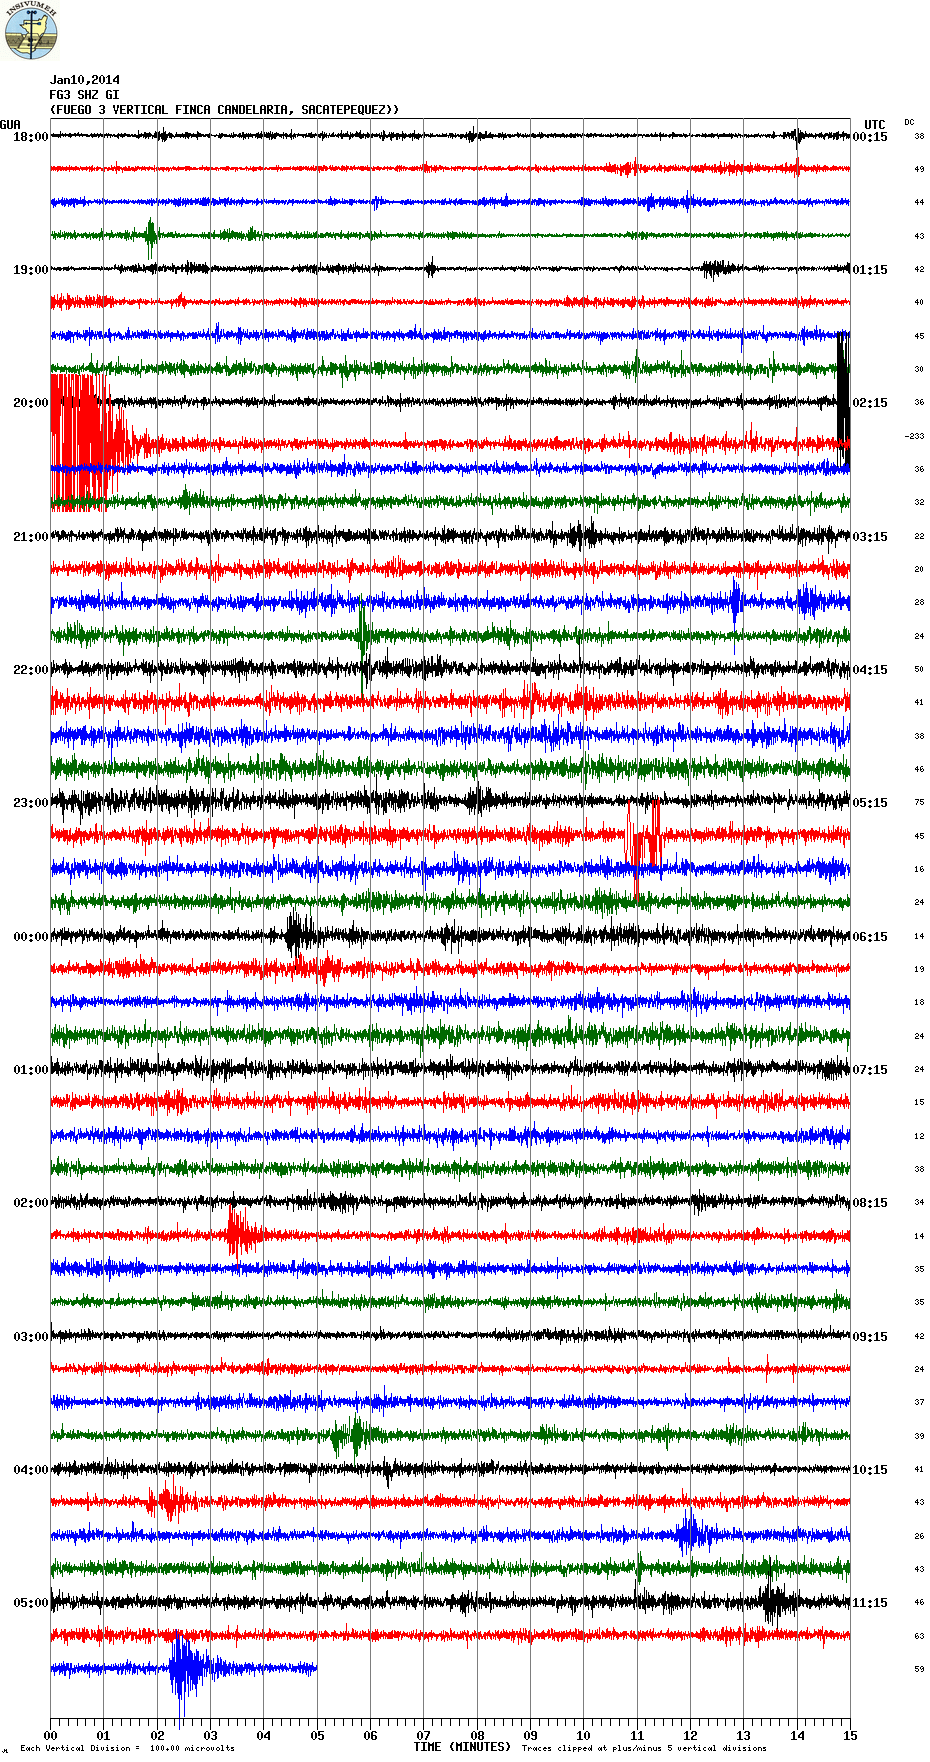 Current seismic signal of Fuego (FG3 station, INSIVUMEH)